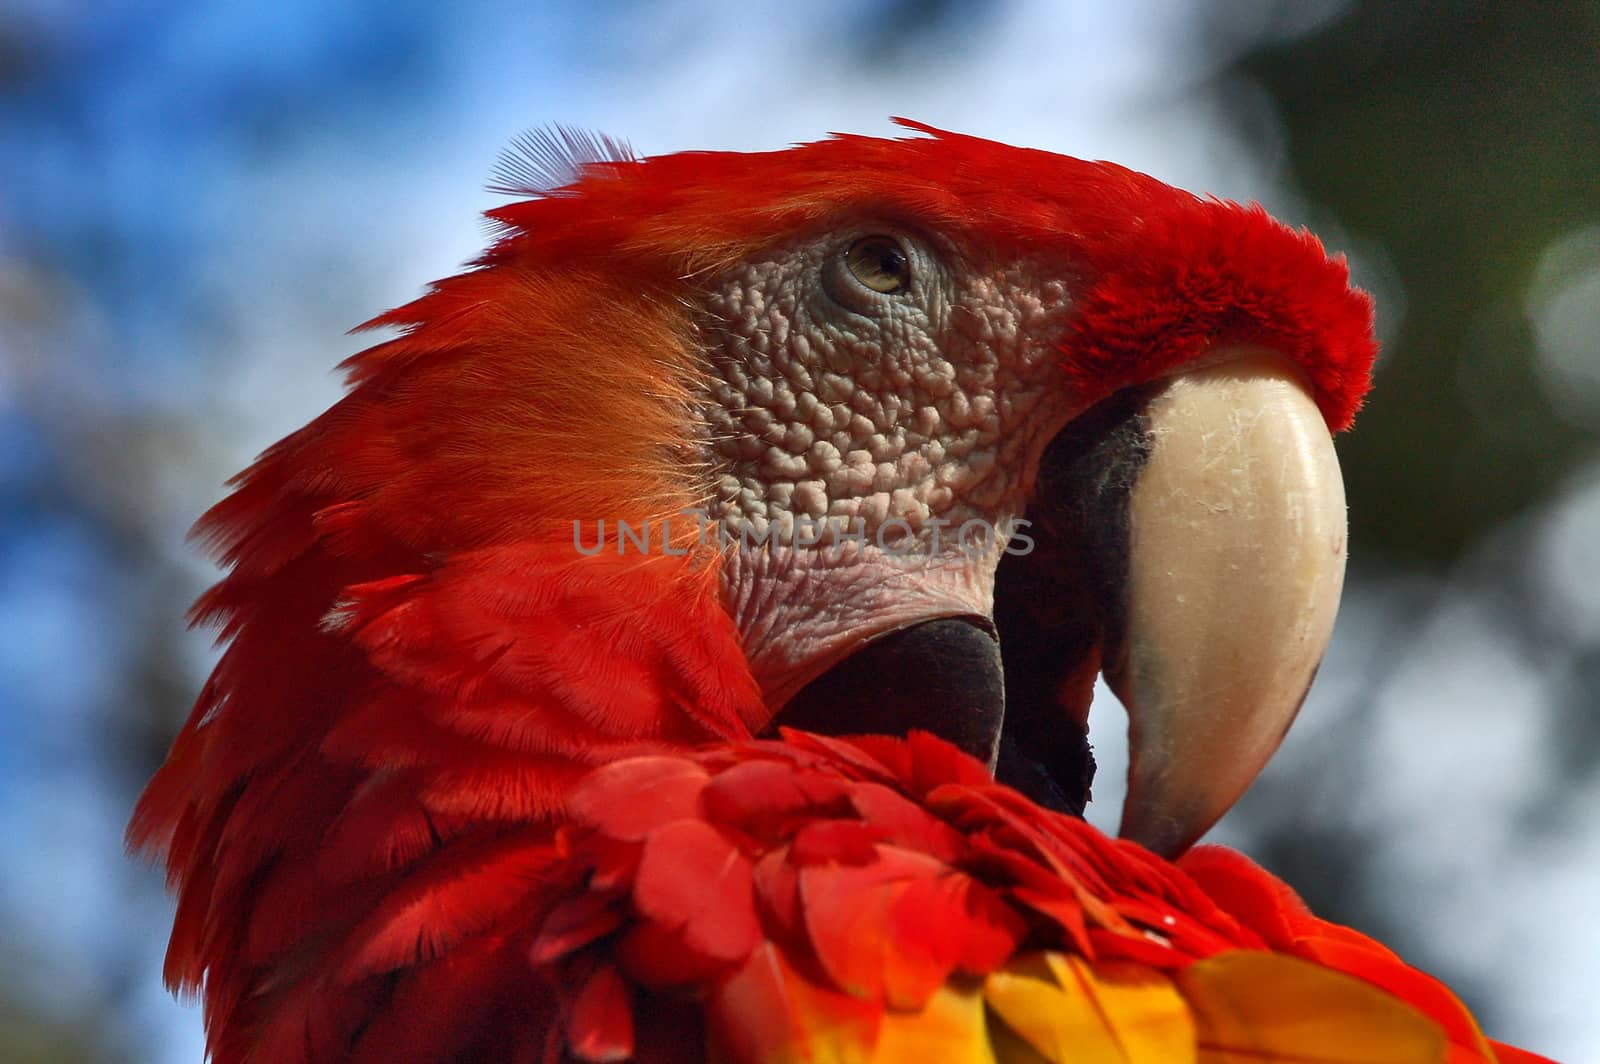  Head of Red Parrot over a Blurred Background